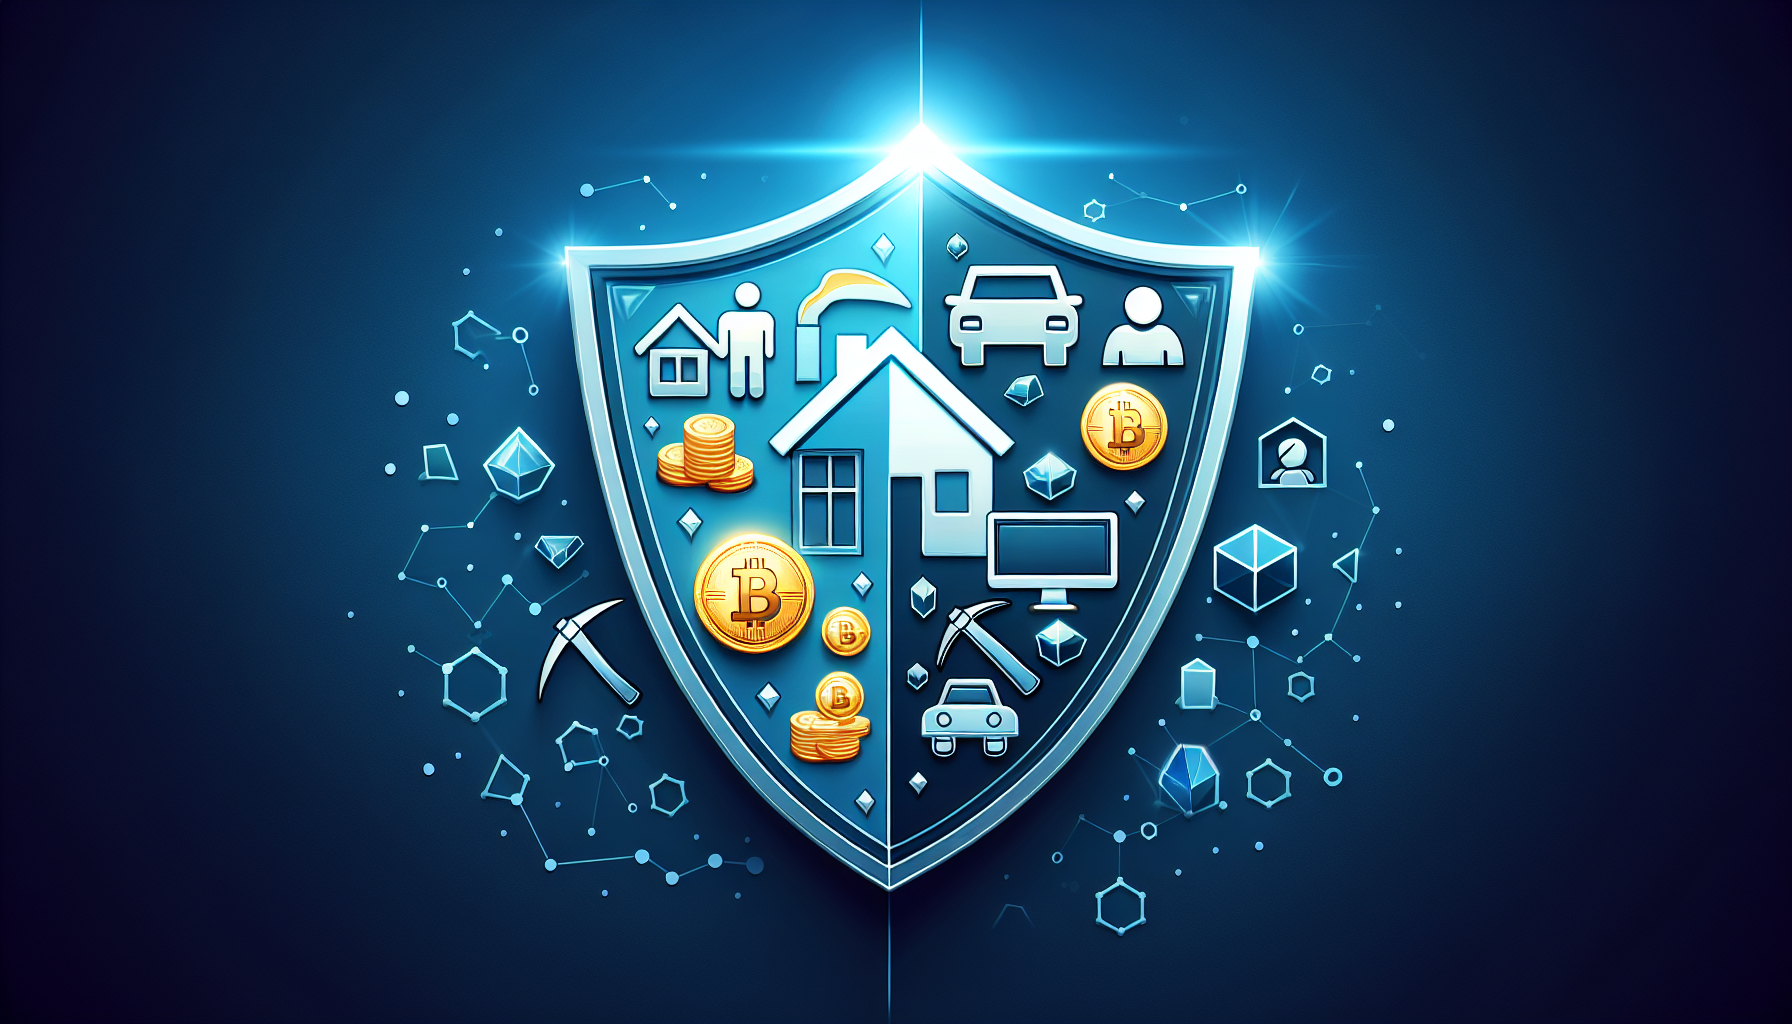 Illustration of a shield protecting personal and business assets